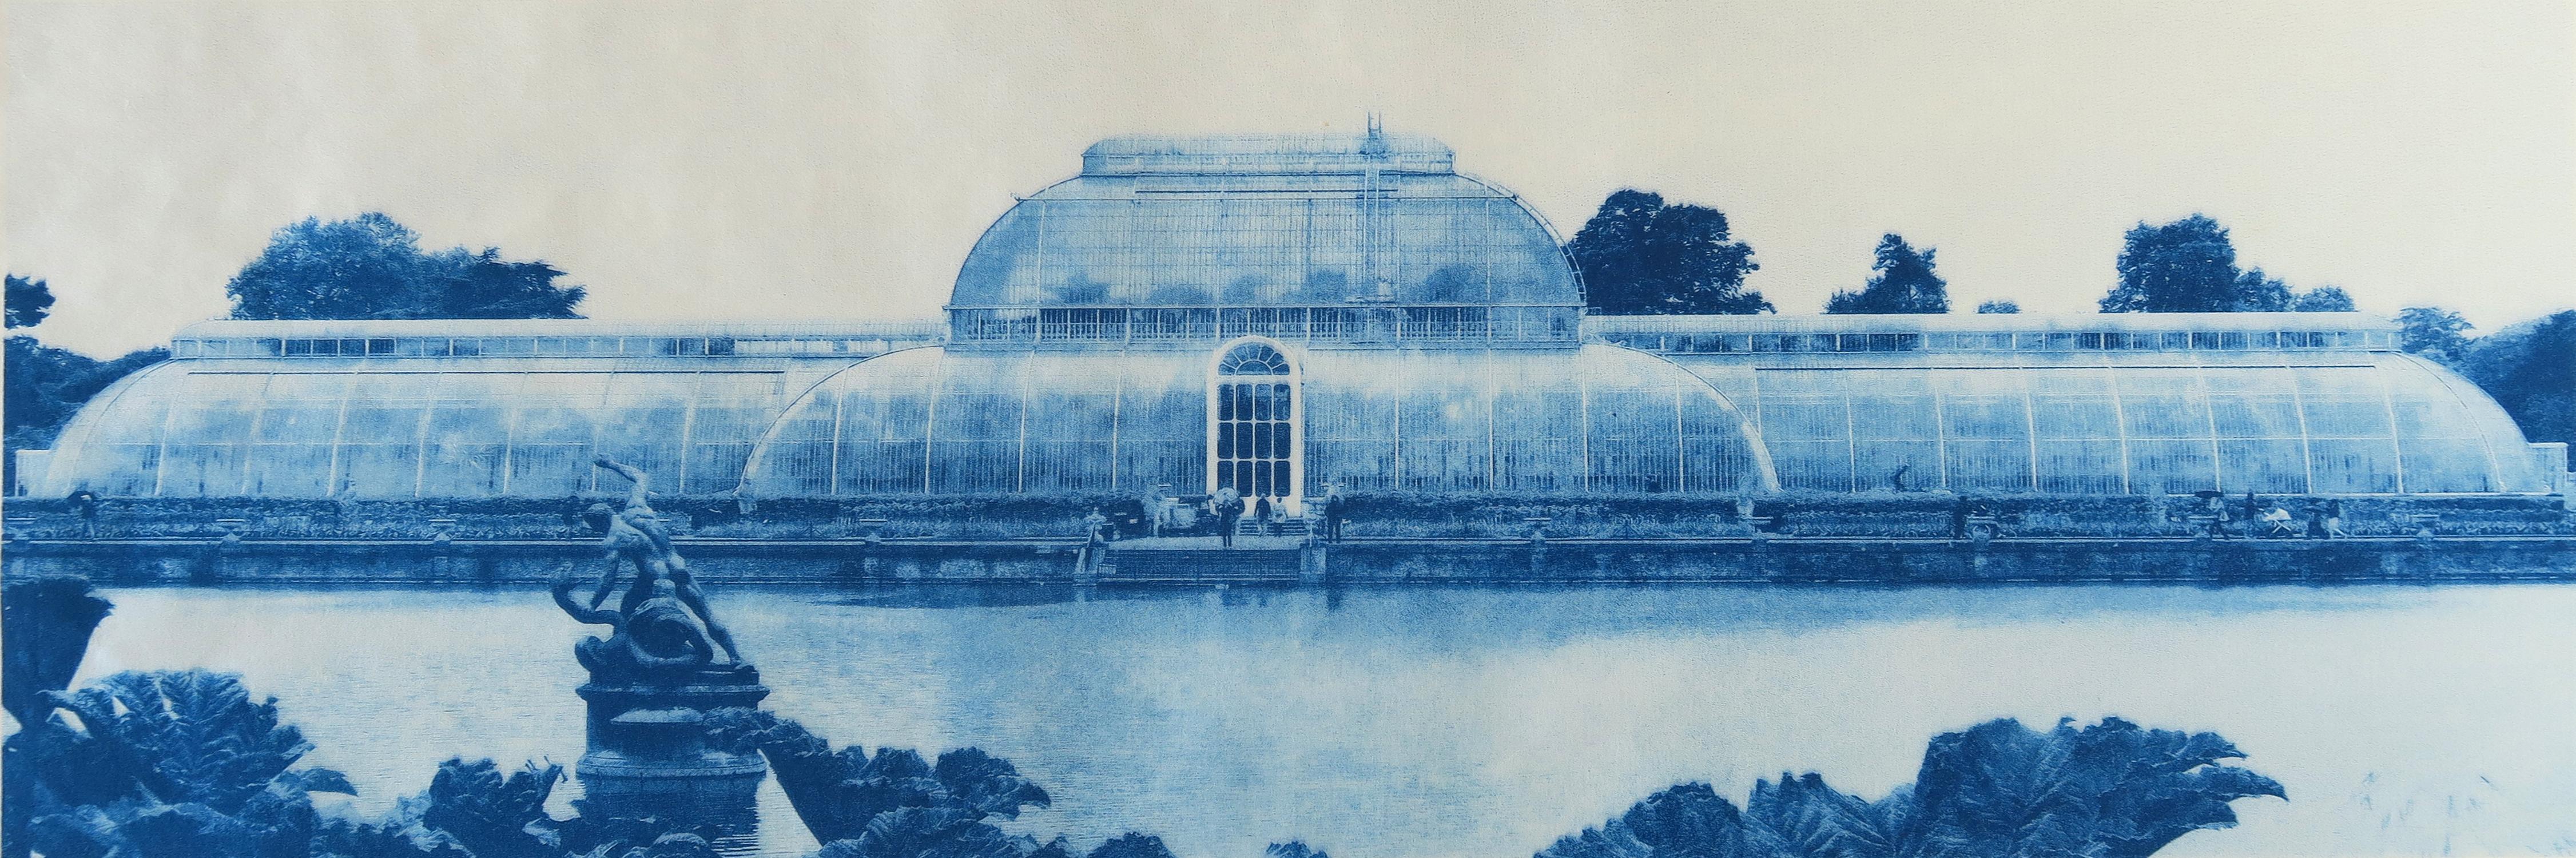 Penelope Stewart Landscape Print - Paradise at Kew Gardens, hand printed photo lithography on Japanese paper 2018, 